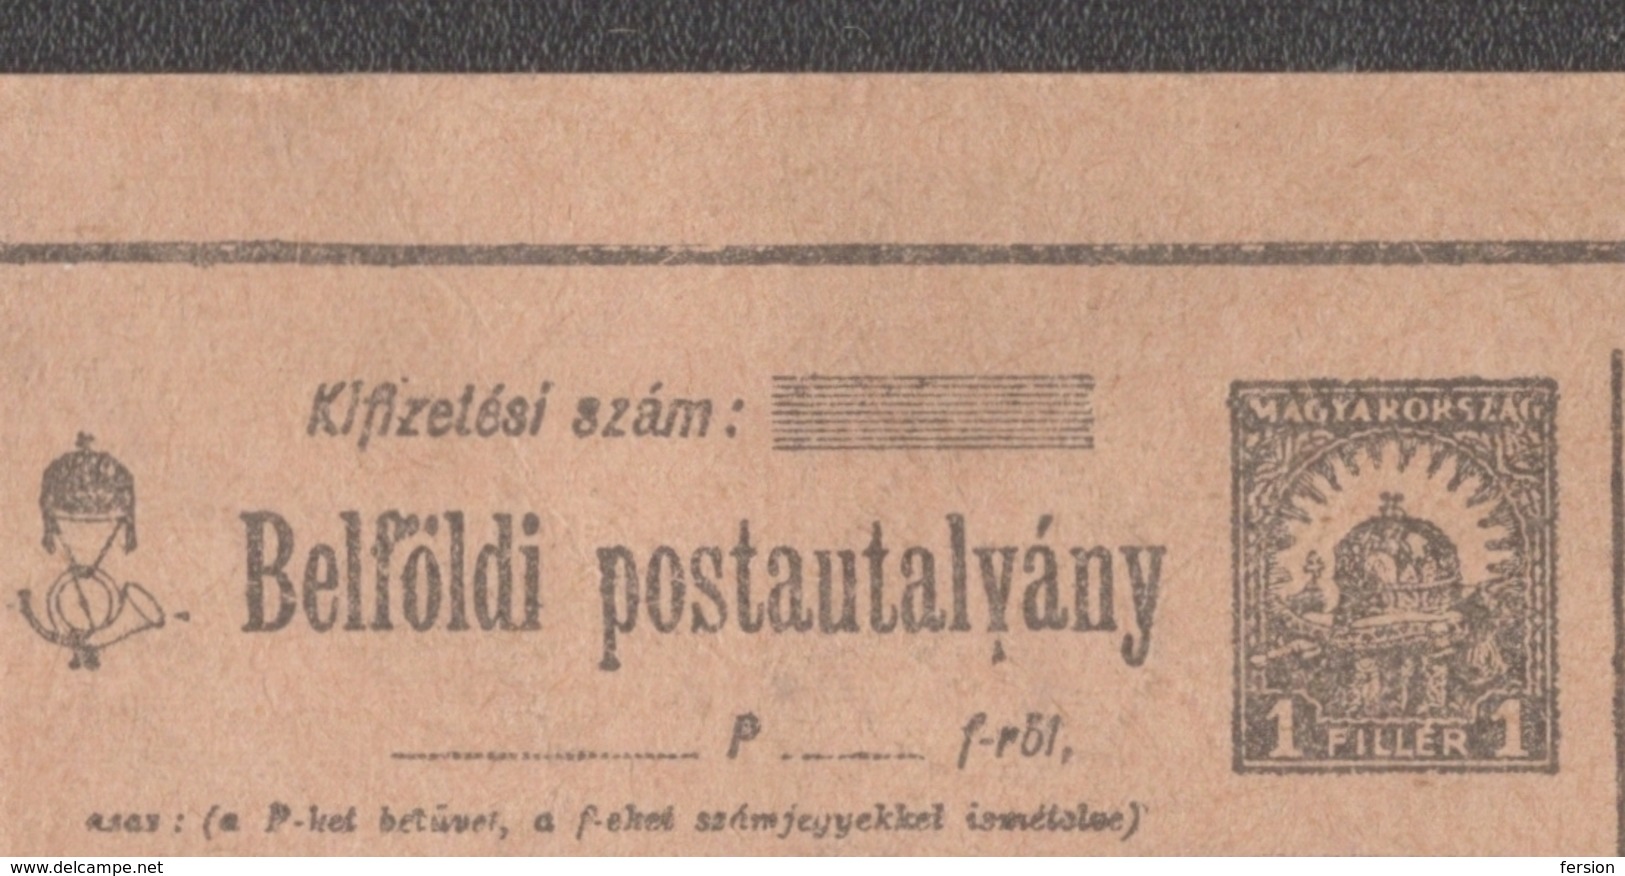 Post Office - CHILDREN POST OFFICE / MONEY Order FORM - Inland / HUNGARY 1930's - Parcel Post Postal Stationery - Parcel Post